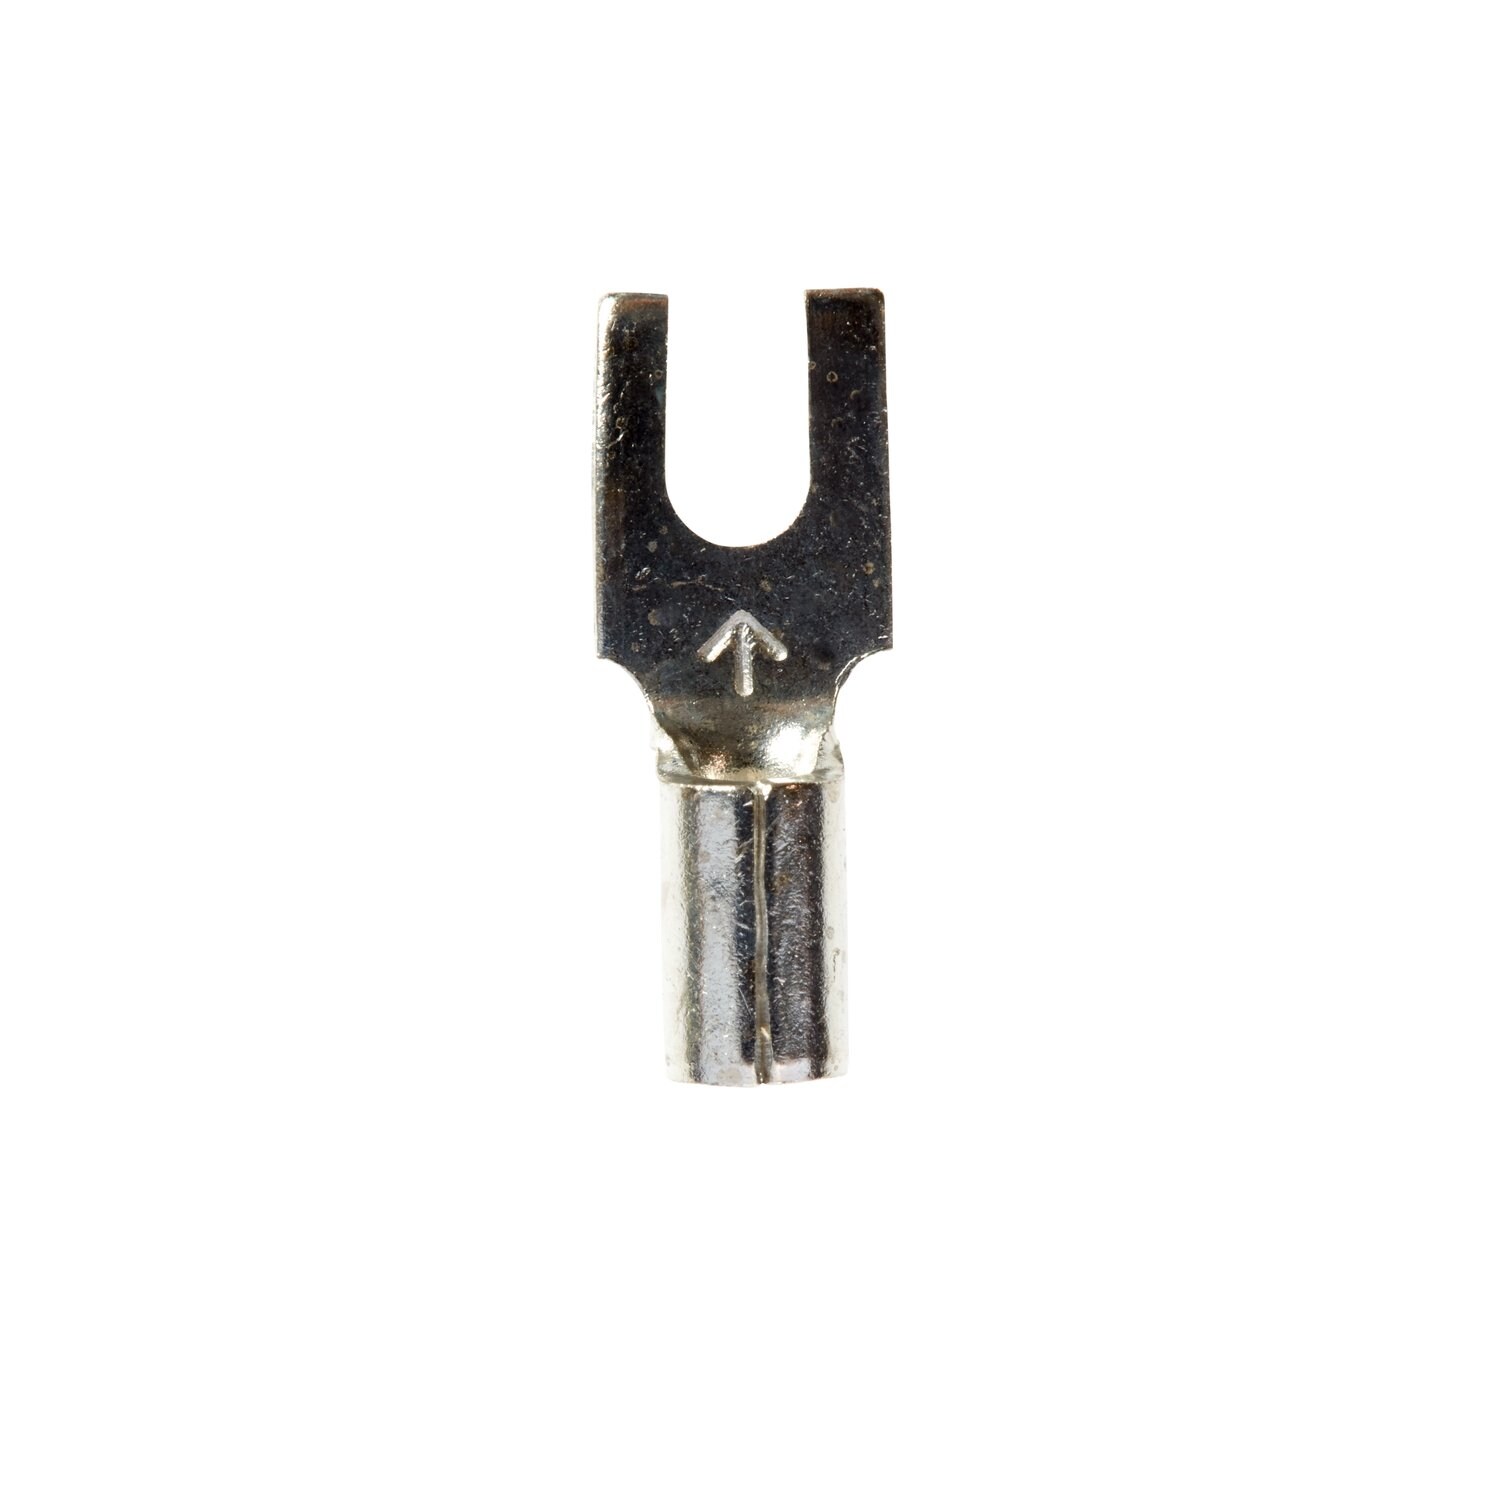 7100164175 - 3M Scotchlok Block Fork, Non-Insulated Butted Seam MU14-4FB/SK, Stud
Size 4, suitable for use in a terminal block, 1000/Case